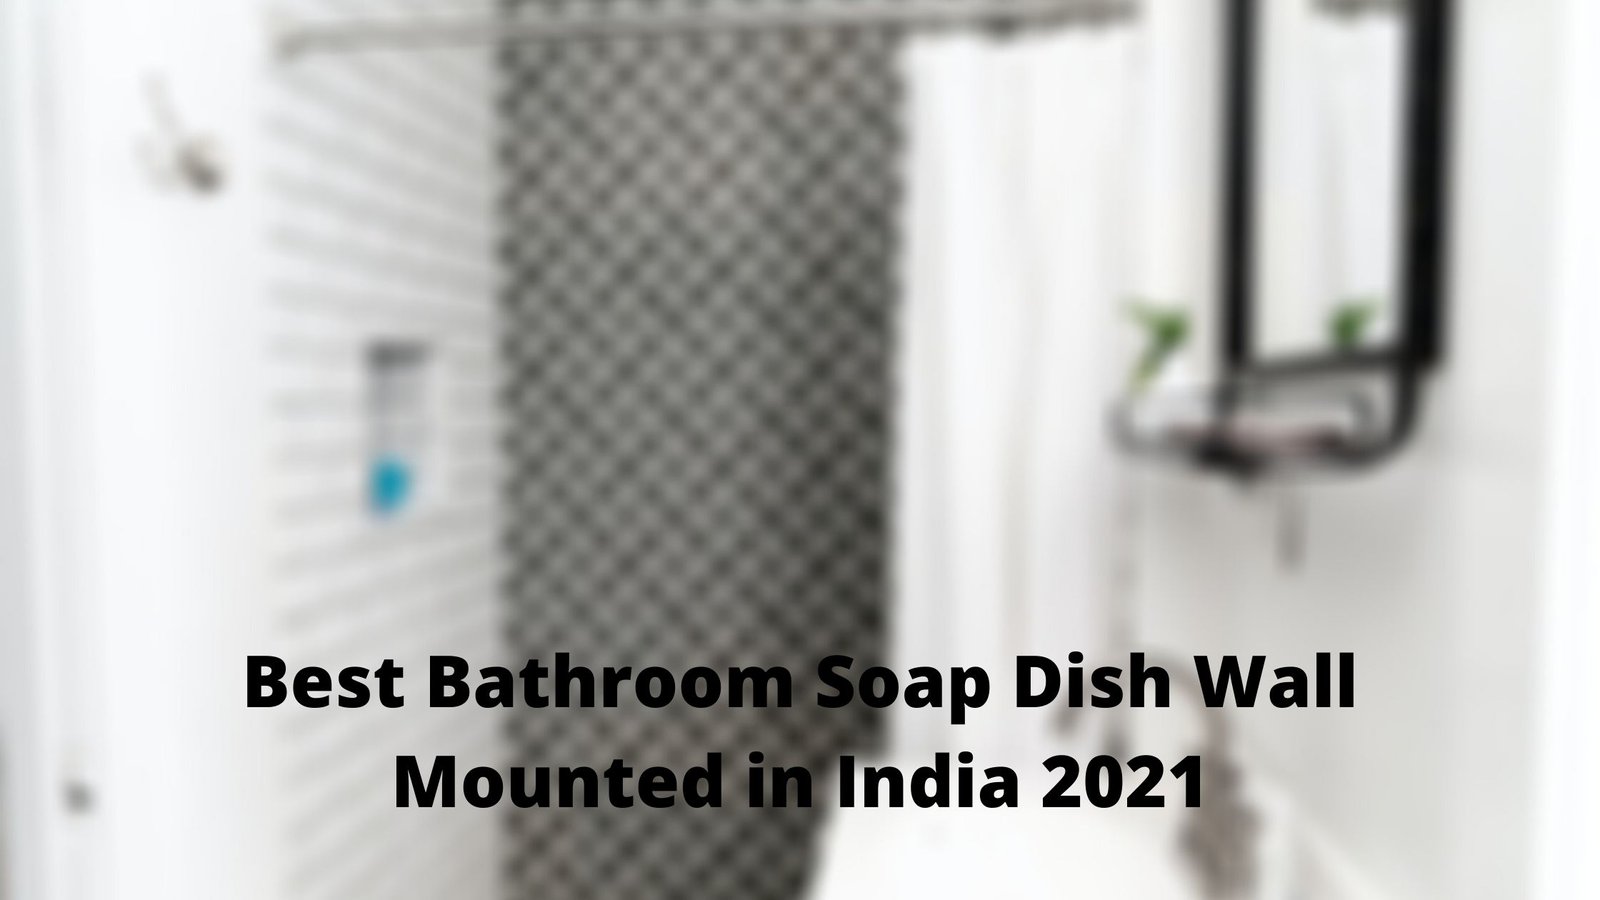 Best Bathroom Soap Dish Wall Mounted in India 2021